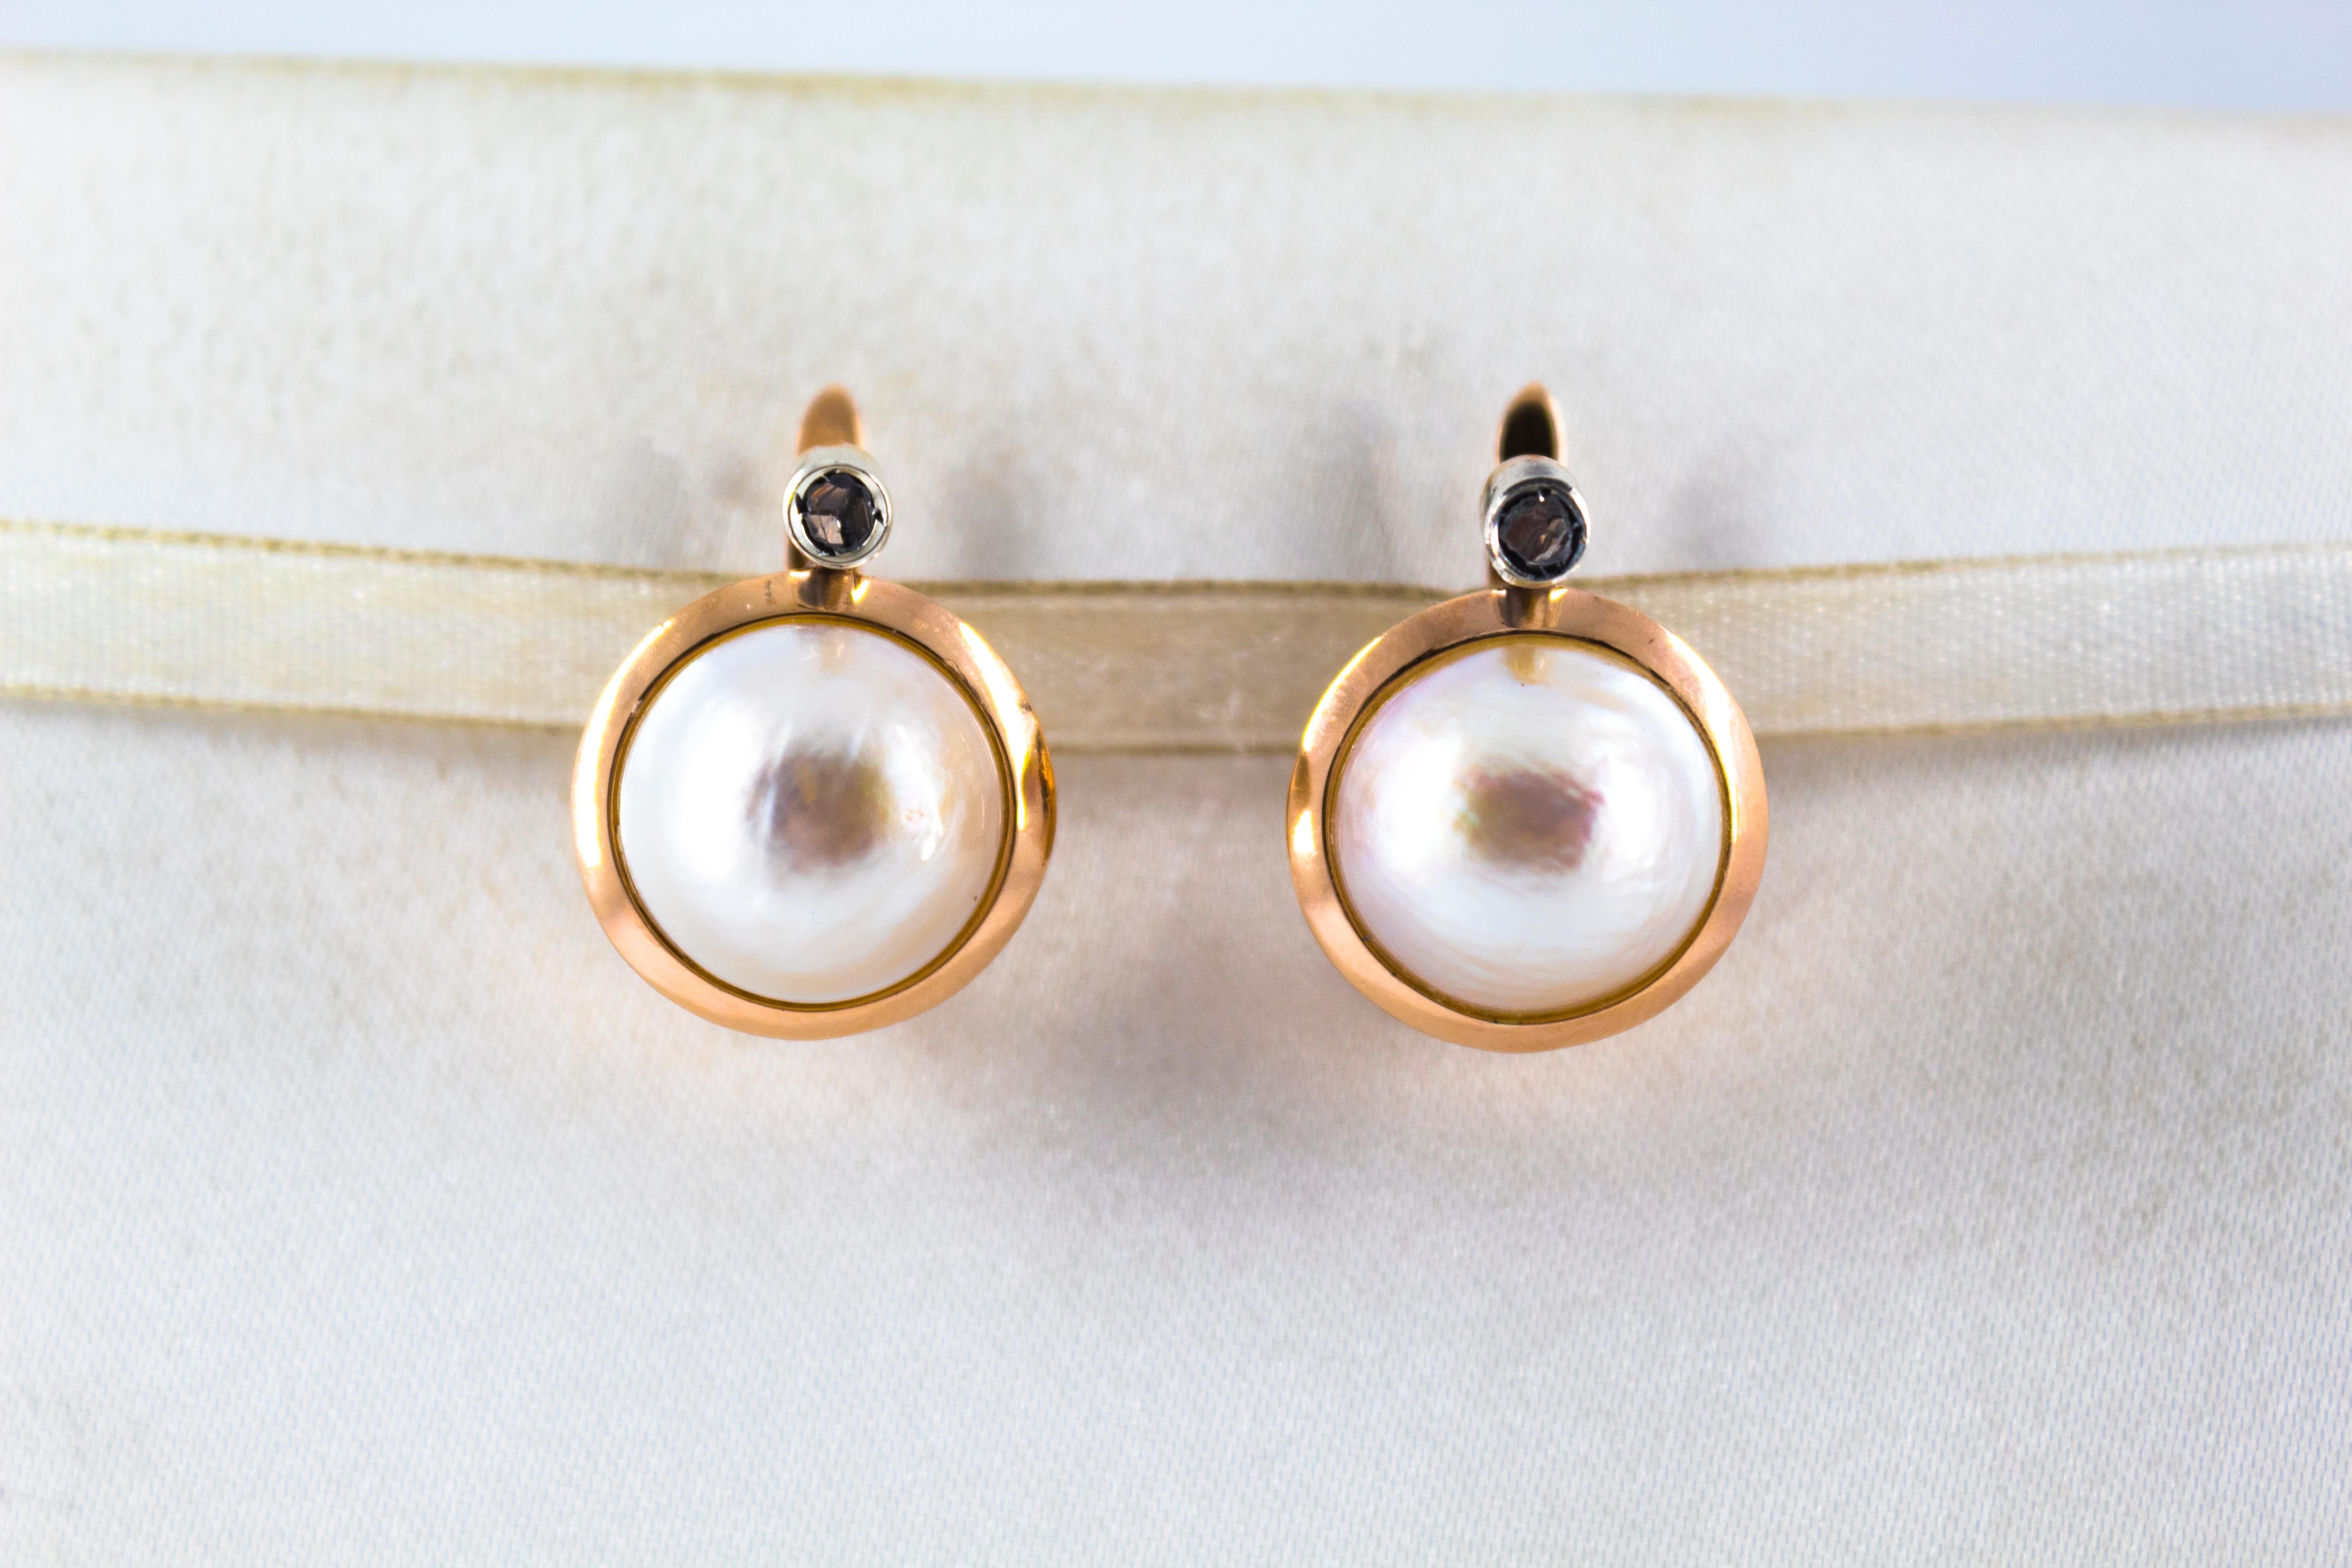 These Earrings are made of 9K Yellow Gold.
These Earrings have 0.10 Carats of White Rose Cut Diamonds.
These Earrings have also Mabe Pearls.
All our Earrings have pins for pierced ears but we can change the closure and make any of our Earrings